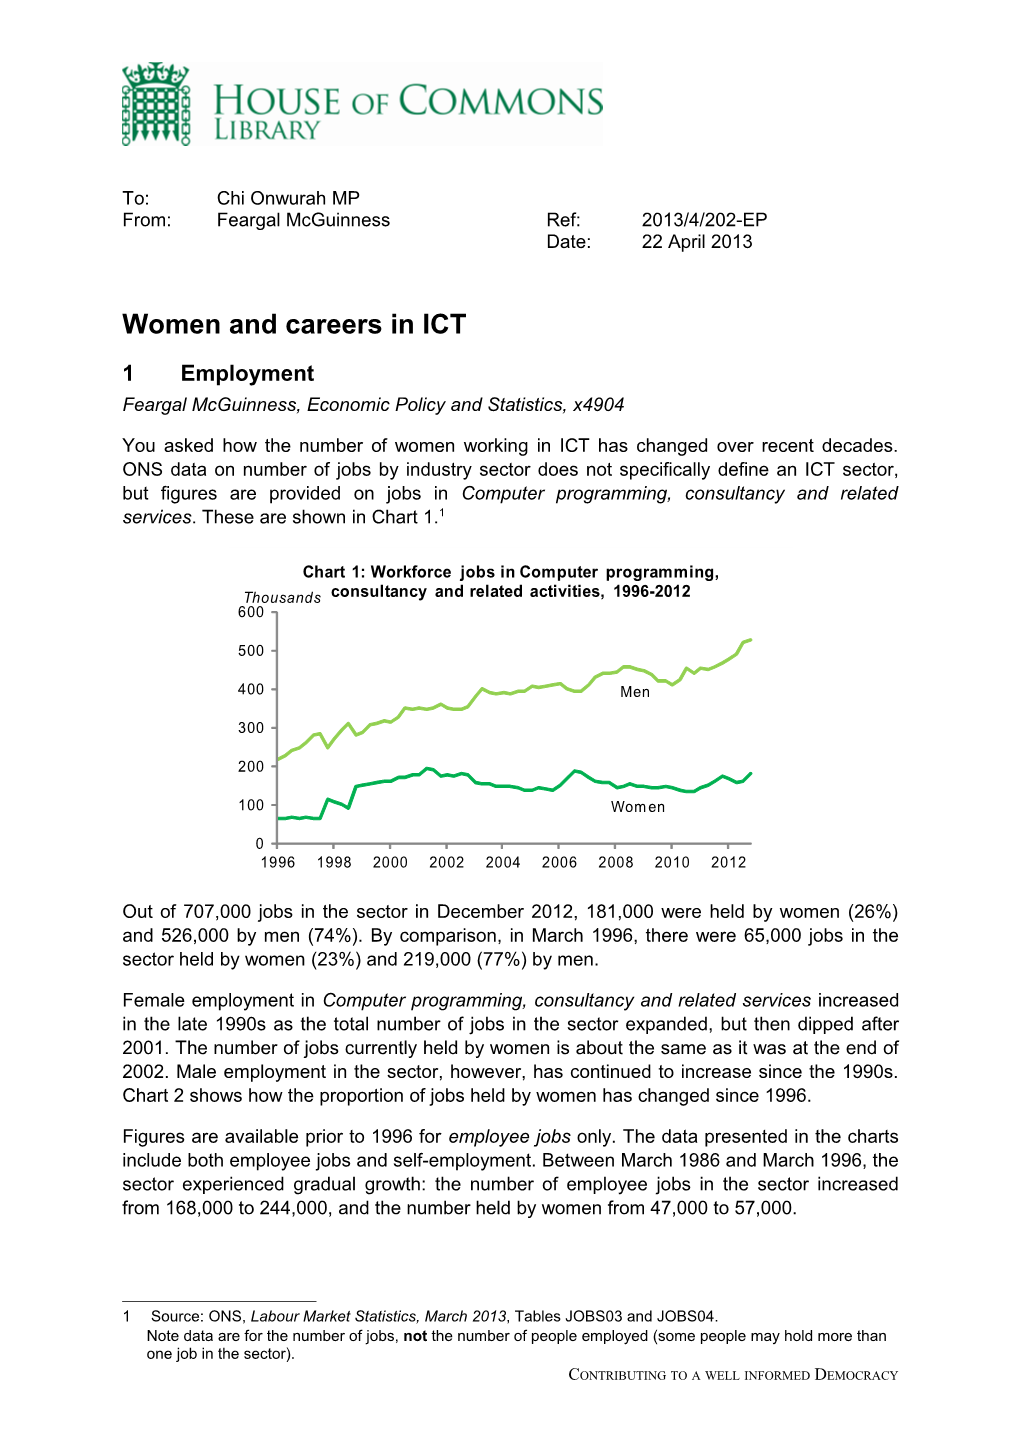 Women and Careers in ICT